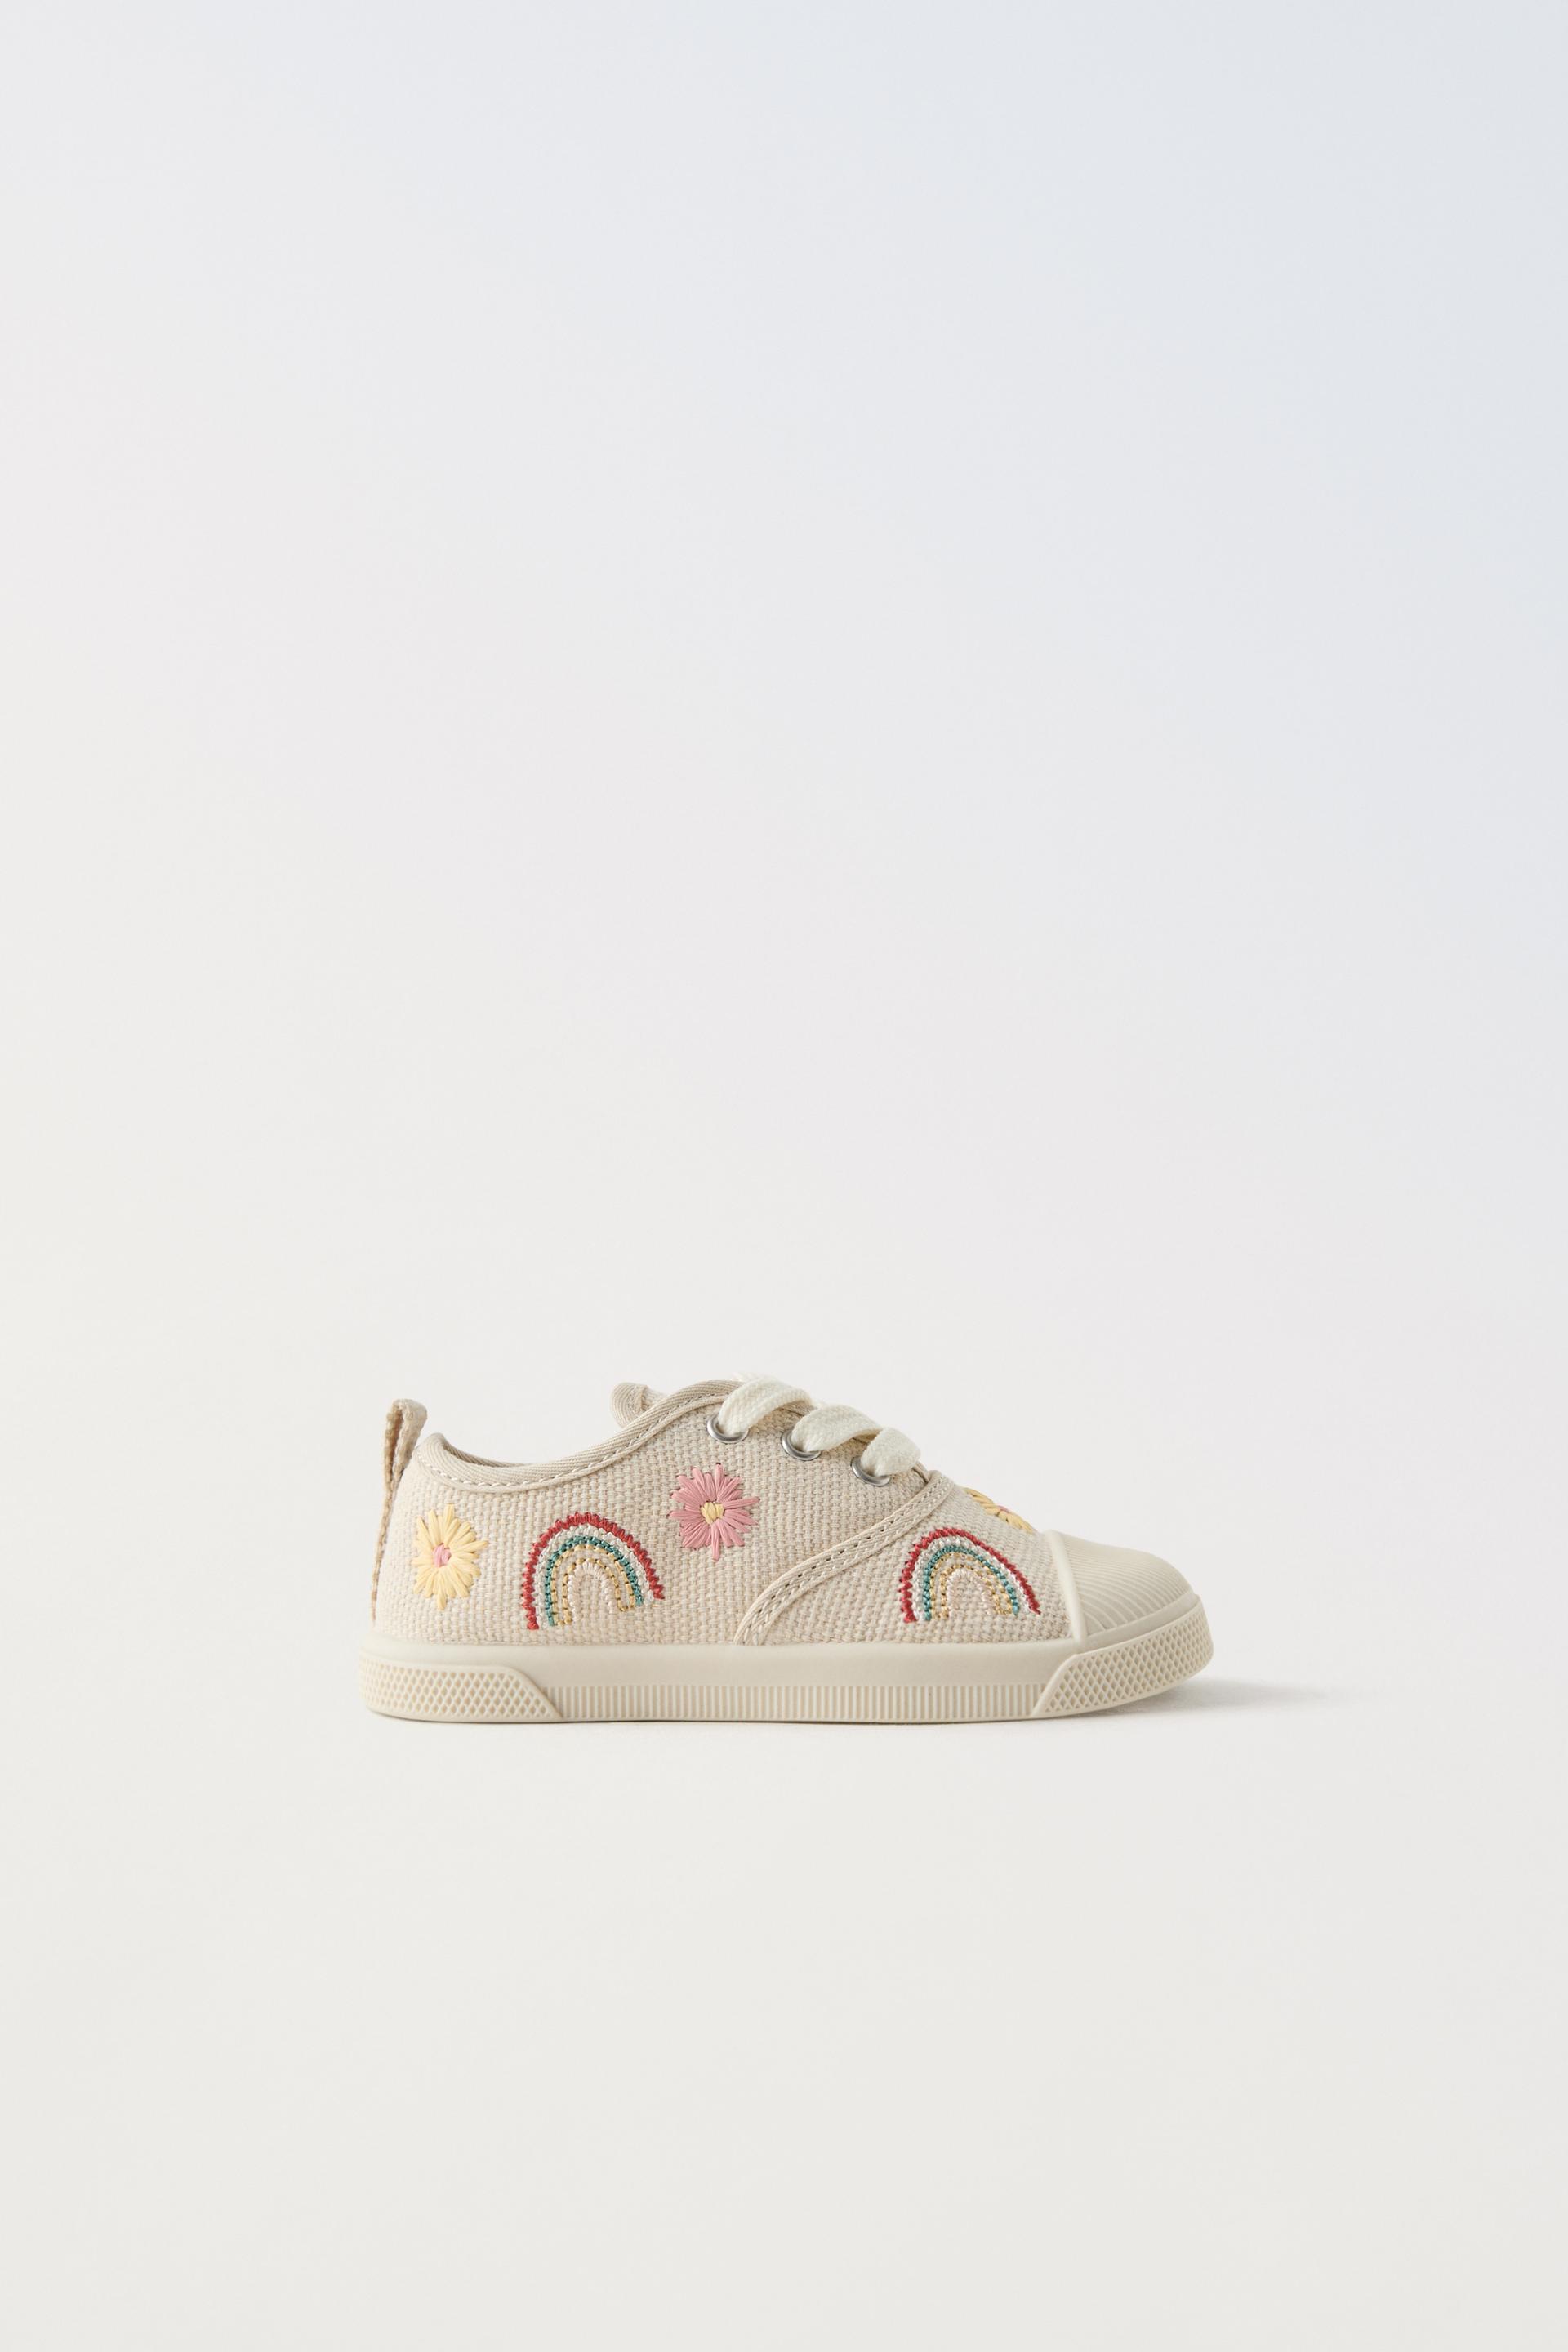 EMBROIDERED COTTON SNEAKERS ZARA